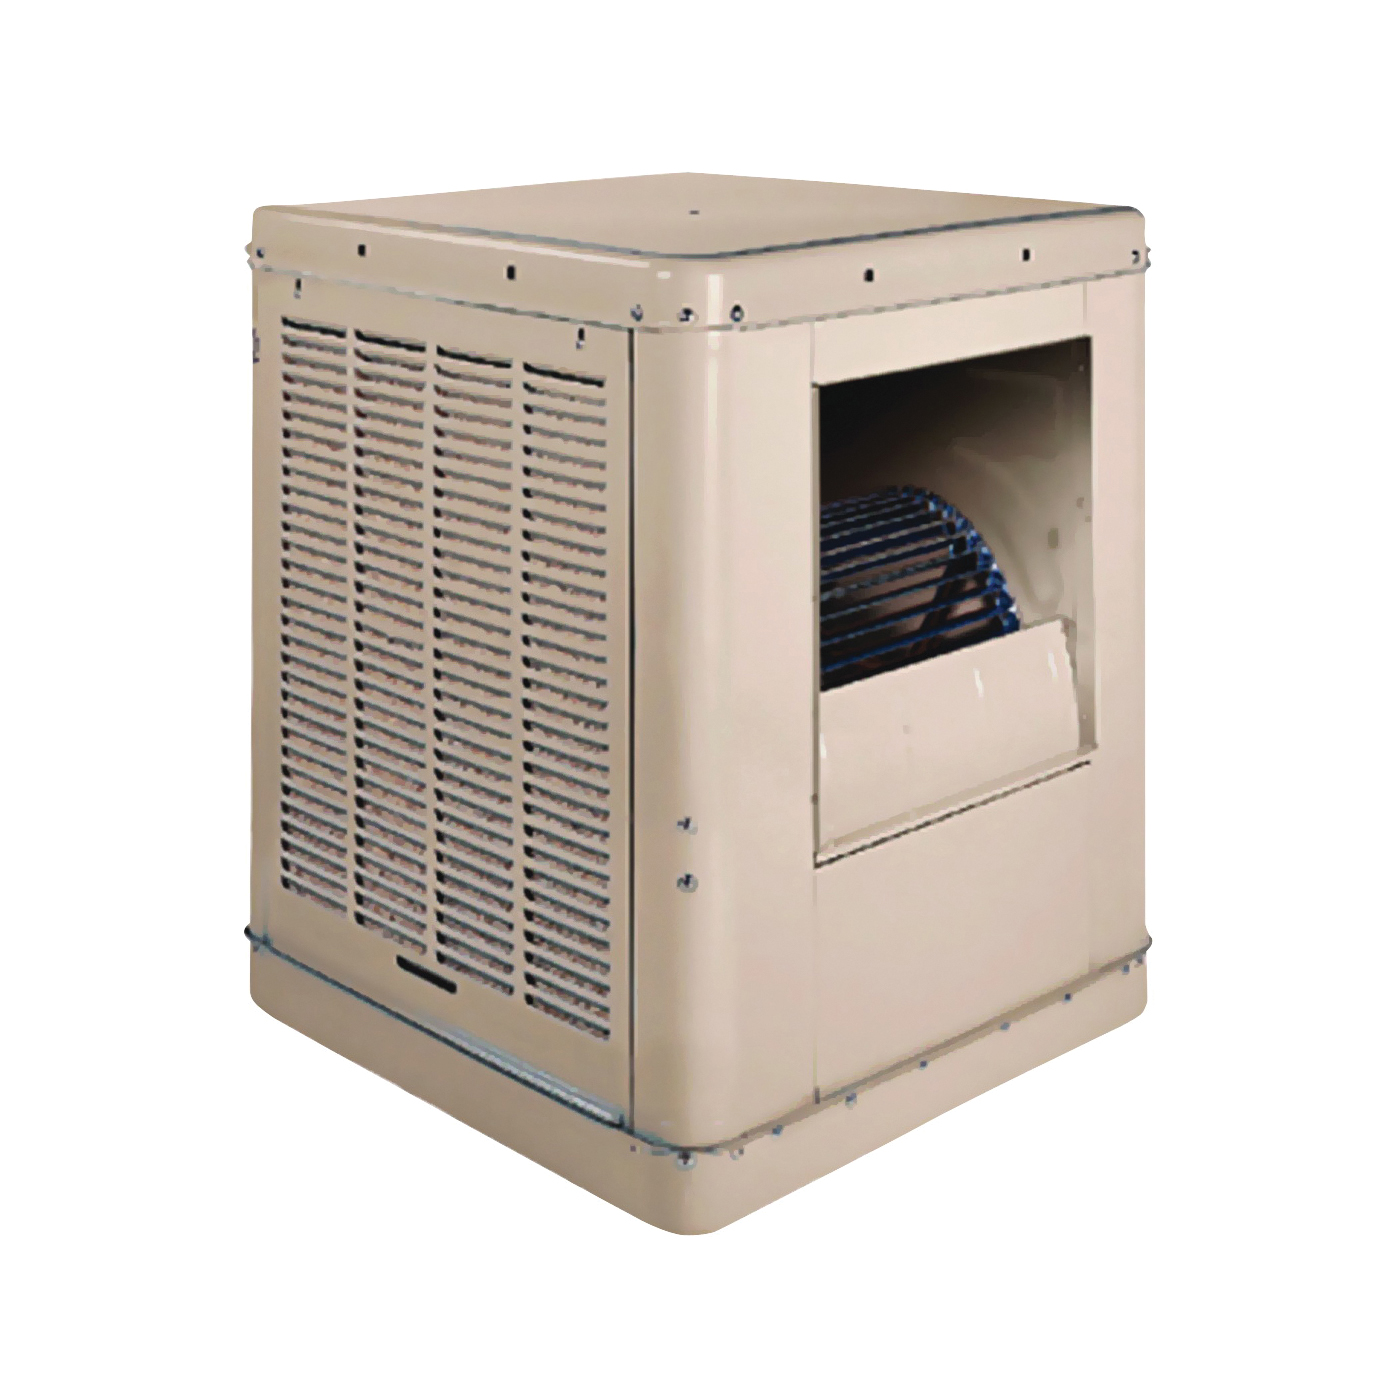 4001SD Evaporative Cooler, 14.3 gal Tank, 2-Speed, 115 V, 7.9-10.5 A, Cool Sand